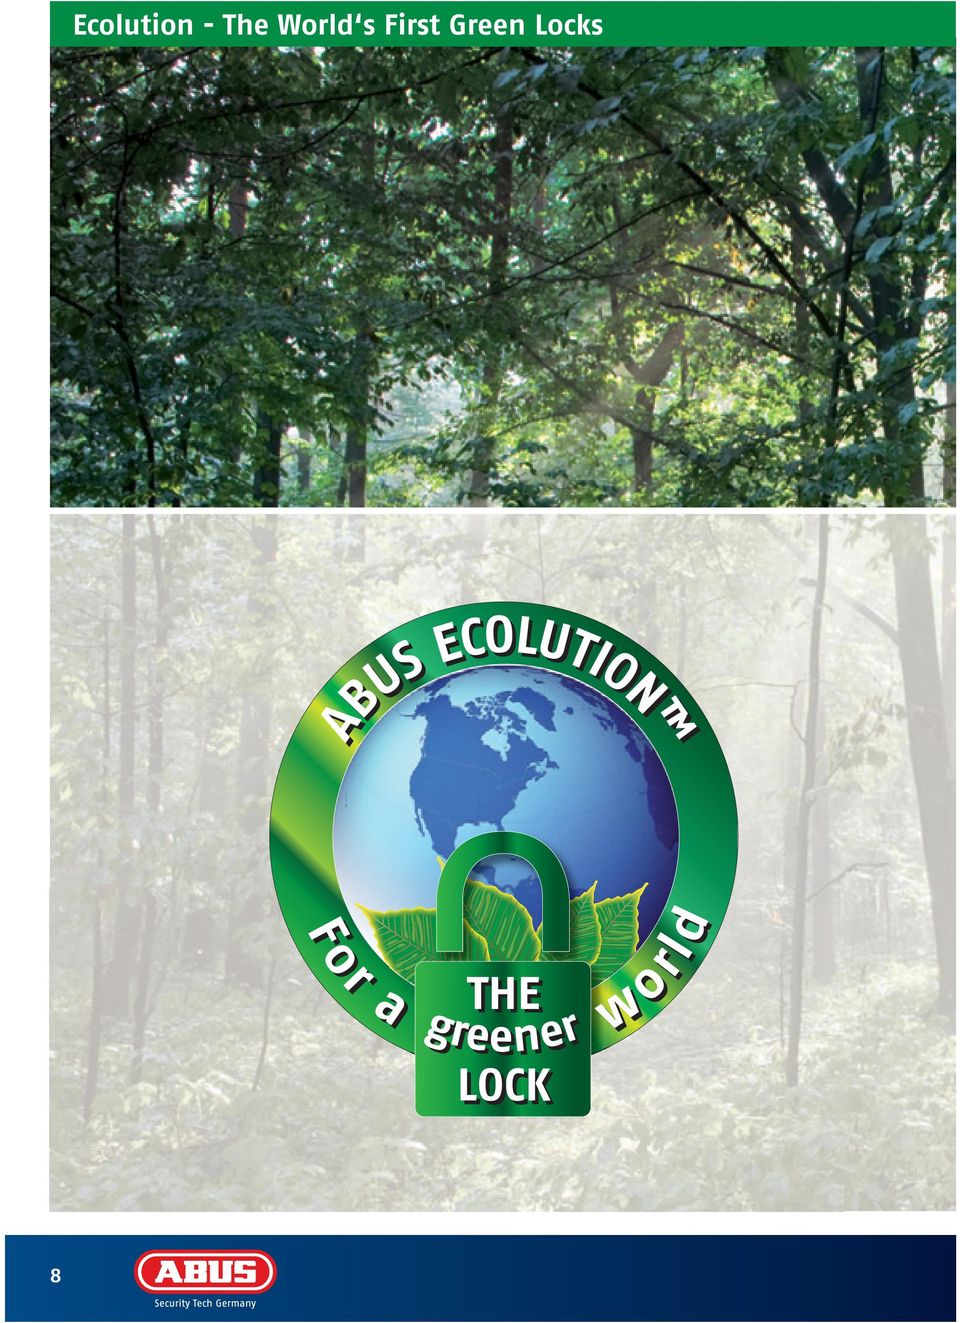 ABUS ECOLUTION For a greener